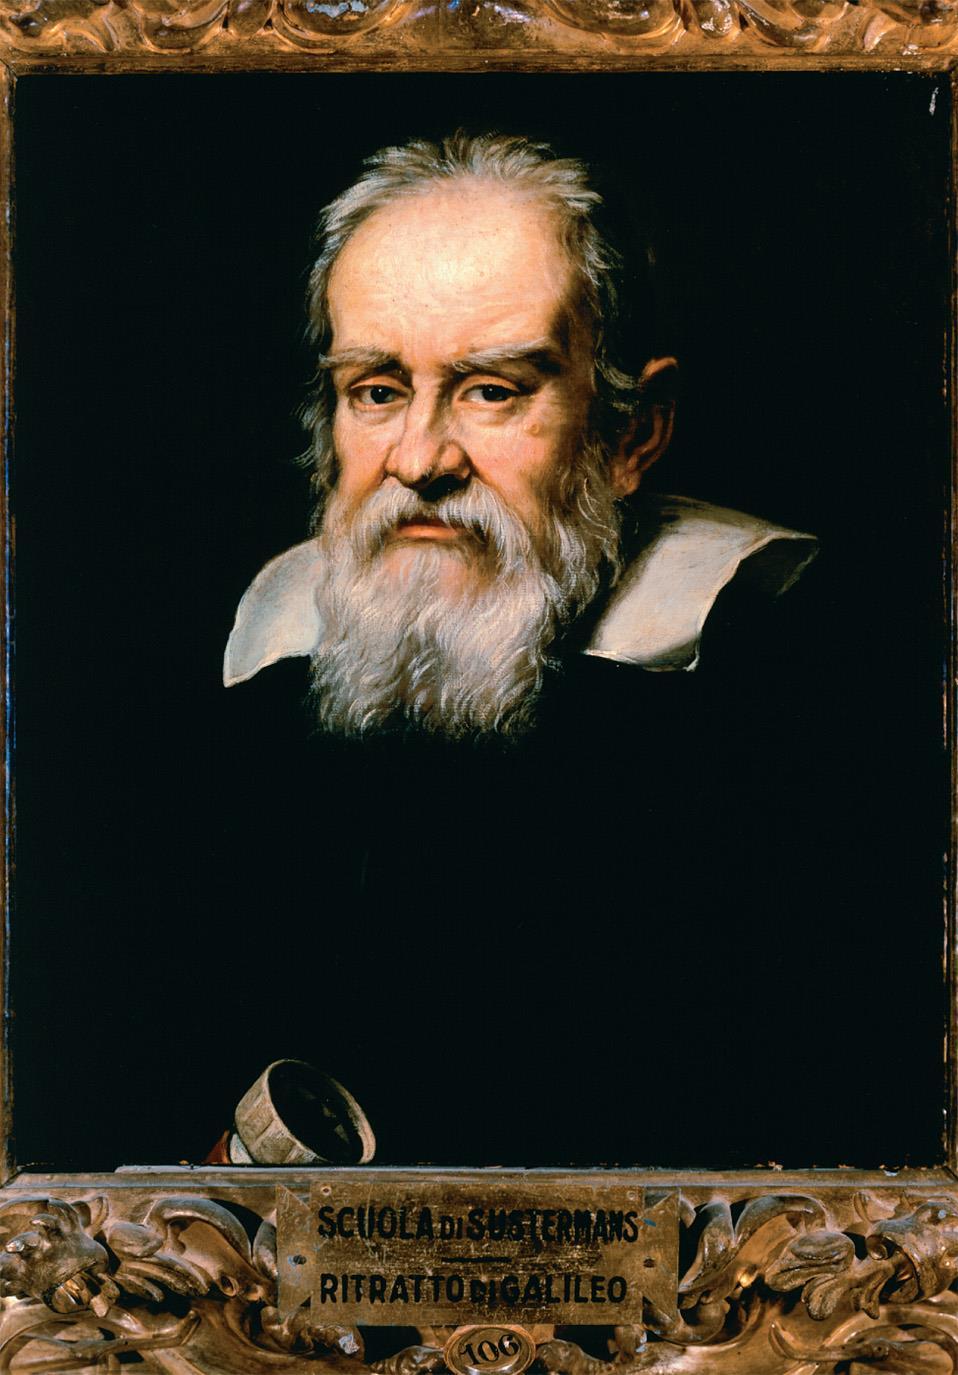 Galileo Galilei achieved a Europeanwide reputation as a mathematician, instrument maker, and astronomer.